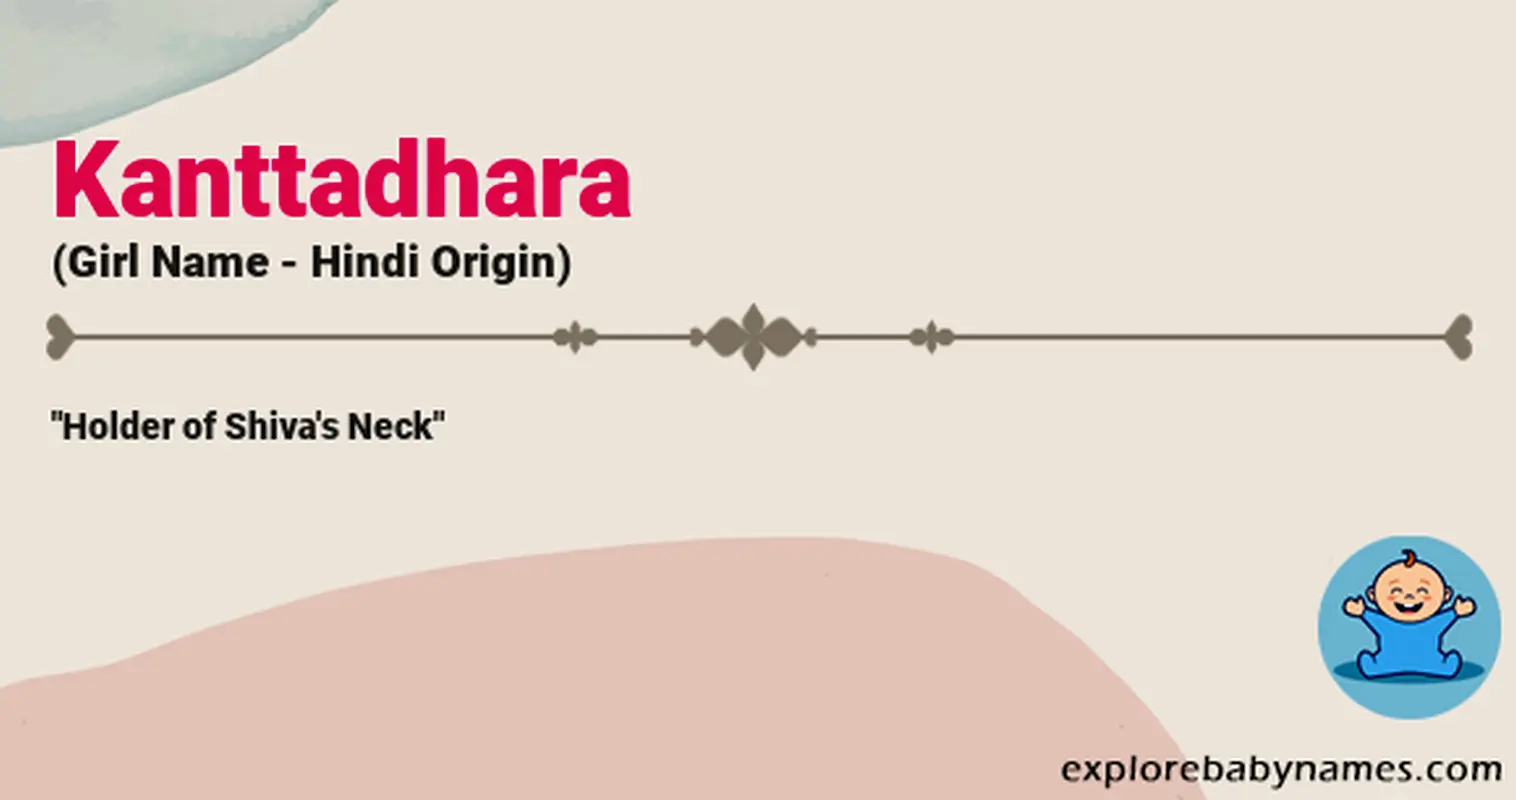 Meaning of Kanttadhara